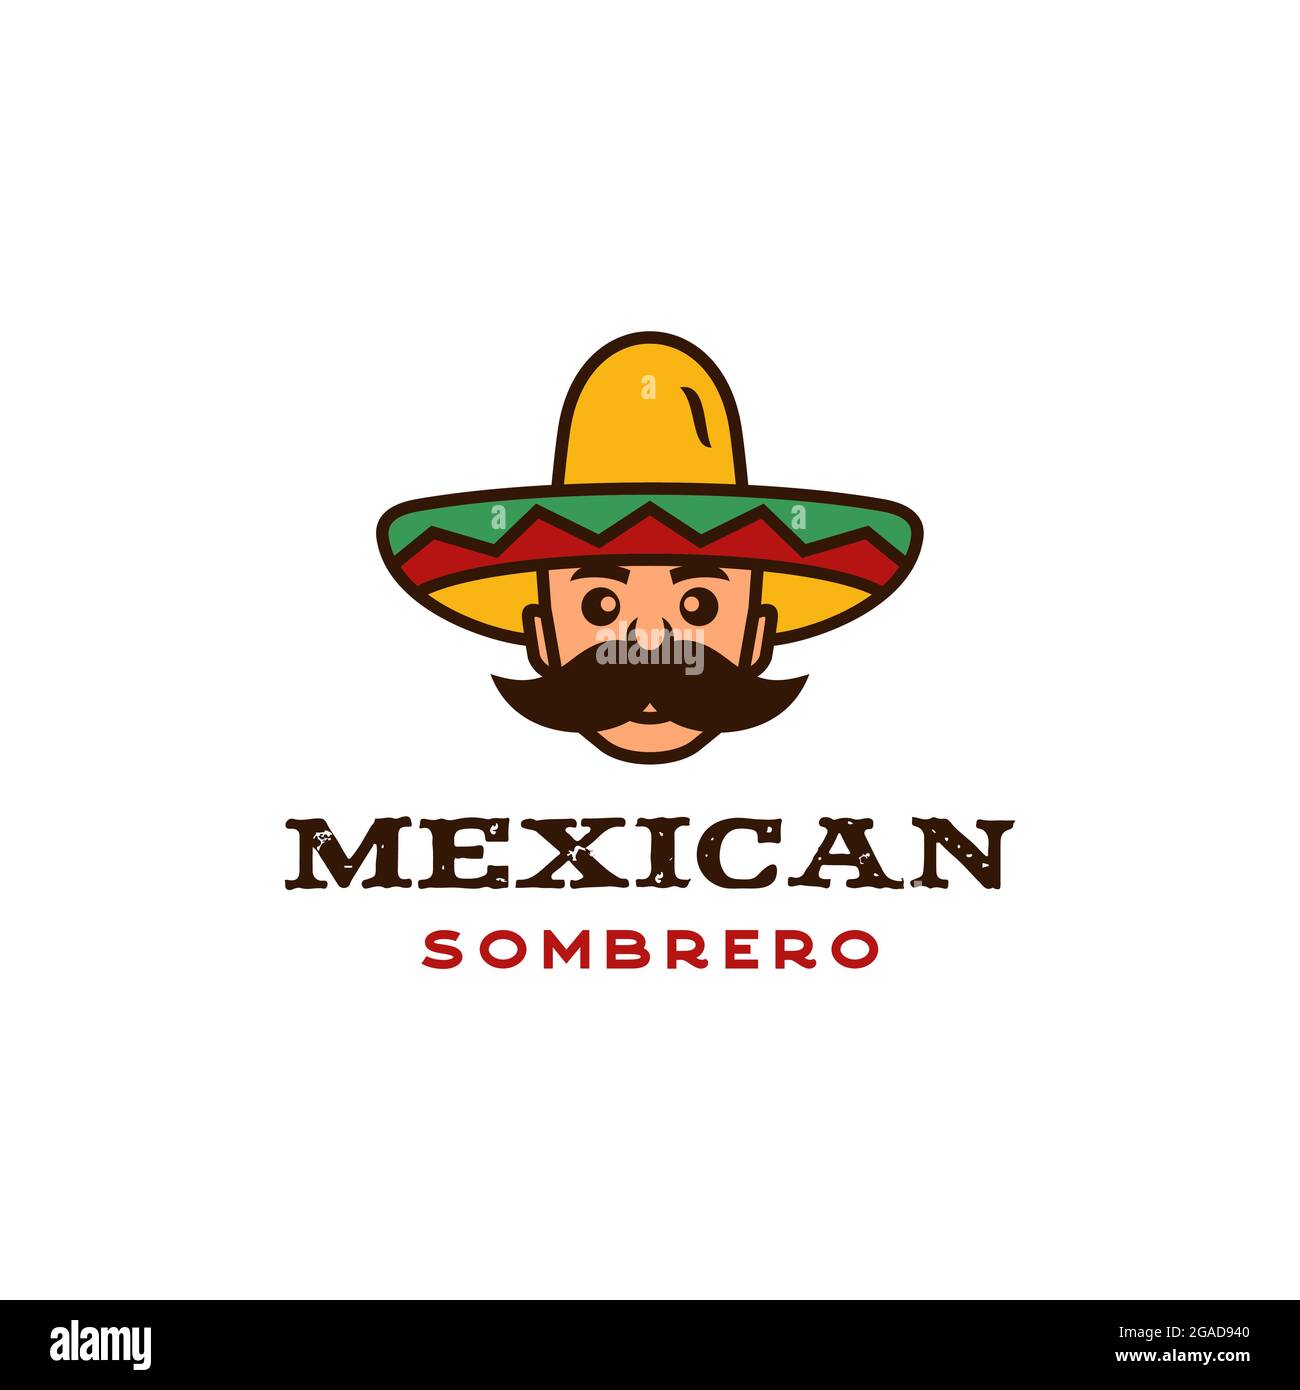 Mexican man with Hat Sombrero, Mexican food, Mexican cuisine restaurant Vintage Label Logo Design Stock Vector